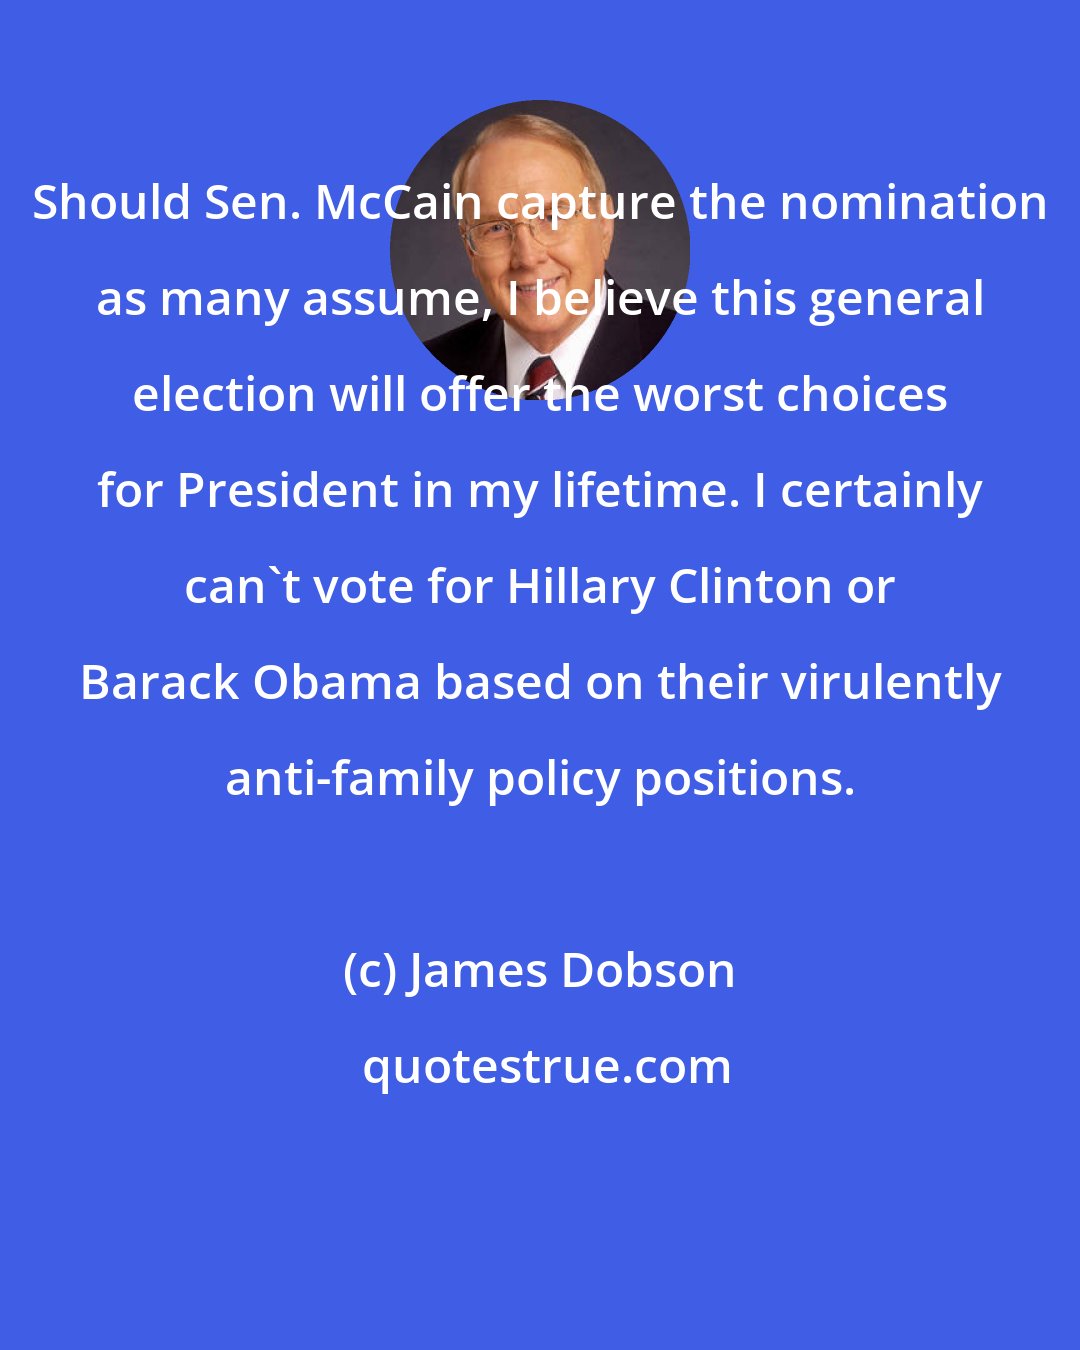 James Dobson: Should Sen. McCain capture the nomination as many assume, I believe this general election will offer the worst choices for President in my lifetime. I certainly can't vote for Hillary Clinton or Barack Obama based on their virulently anti-family policy positions.